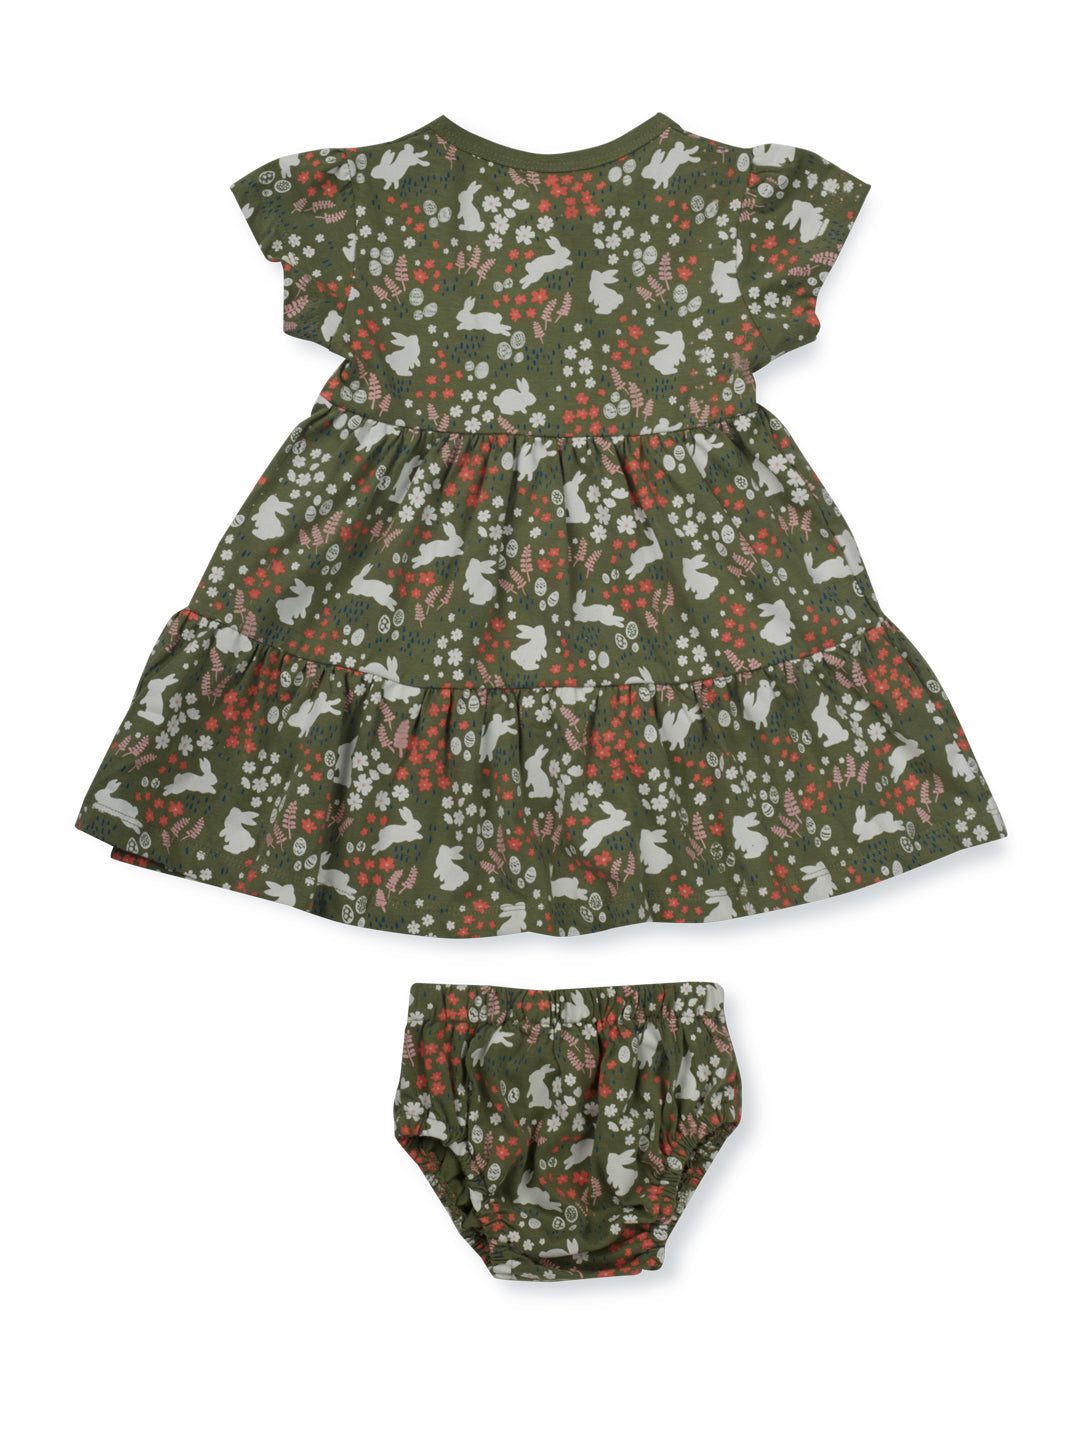 Baby Girls Olive Cotton Printed Dress